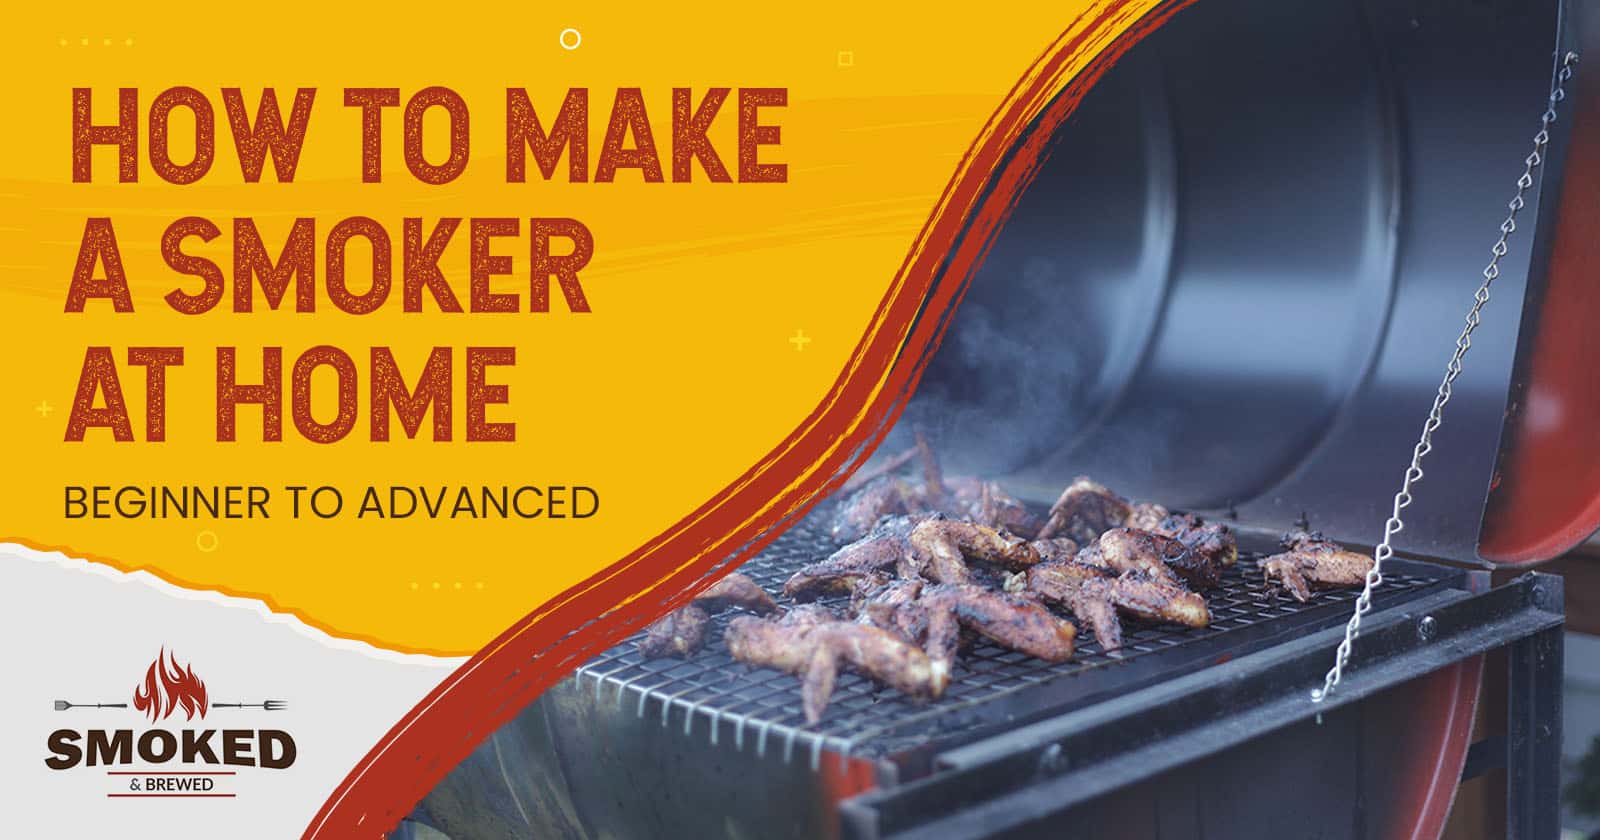 How to Make a Smoker At Home [BEGINNER TO ADVANCED]